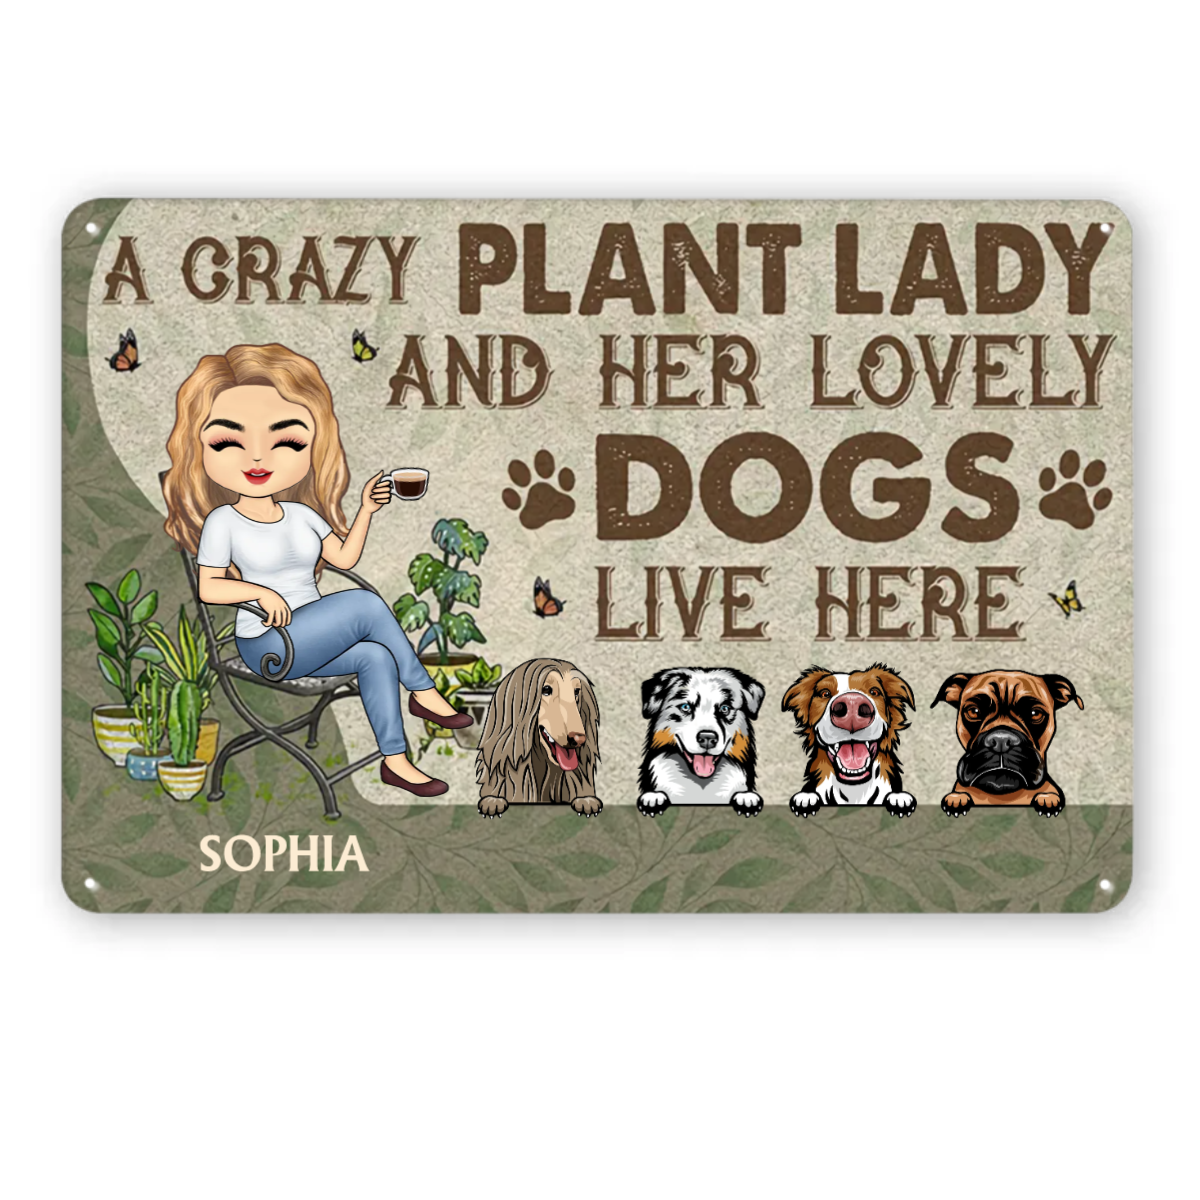 A Crazy Plant Lady And Her Lovely Dogs Live Here - Gift For Gardening Lovers - Personalized Custom Metal Signs